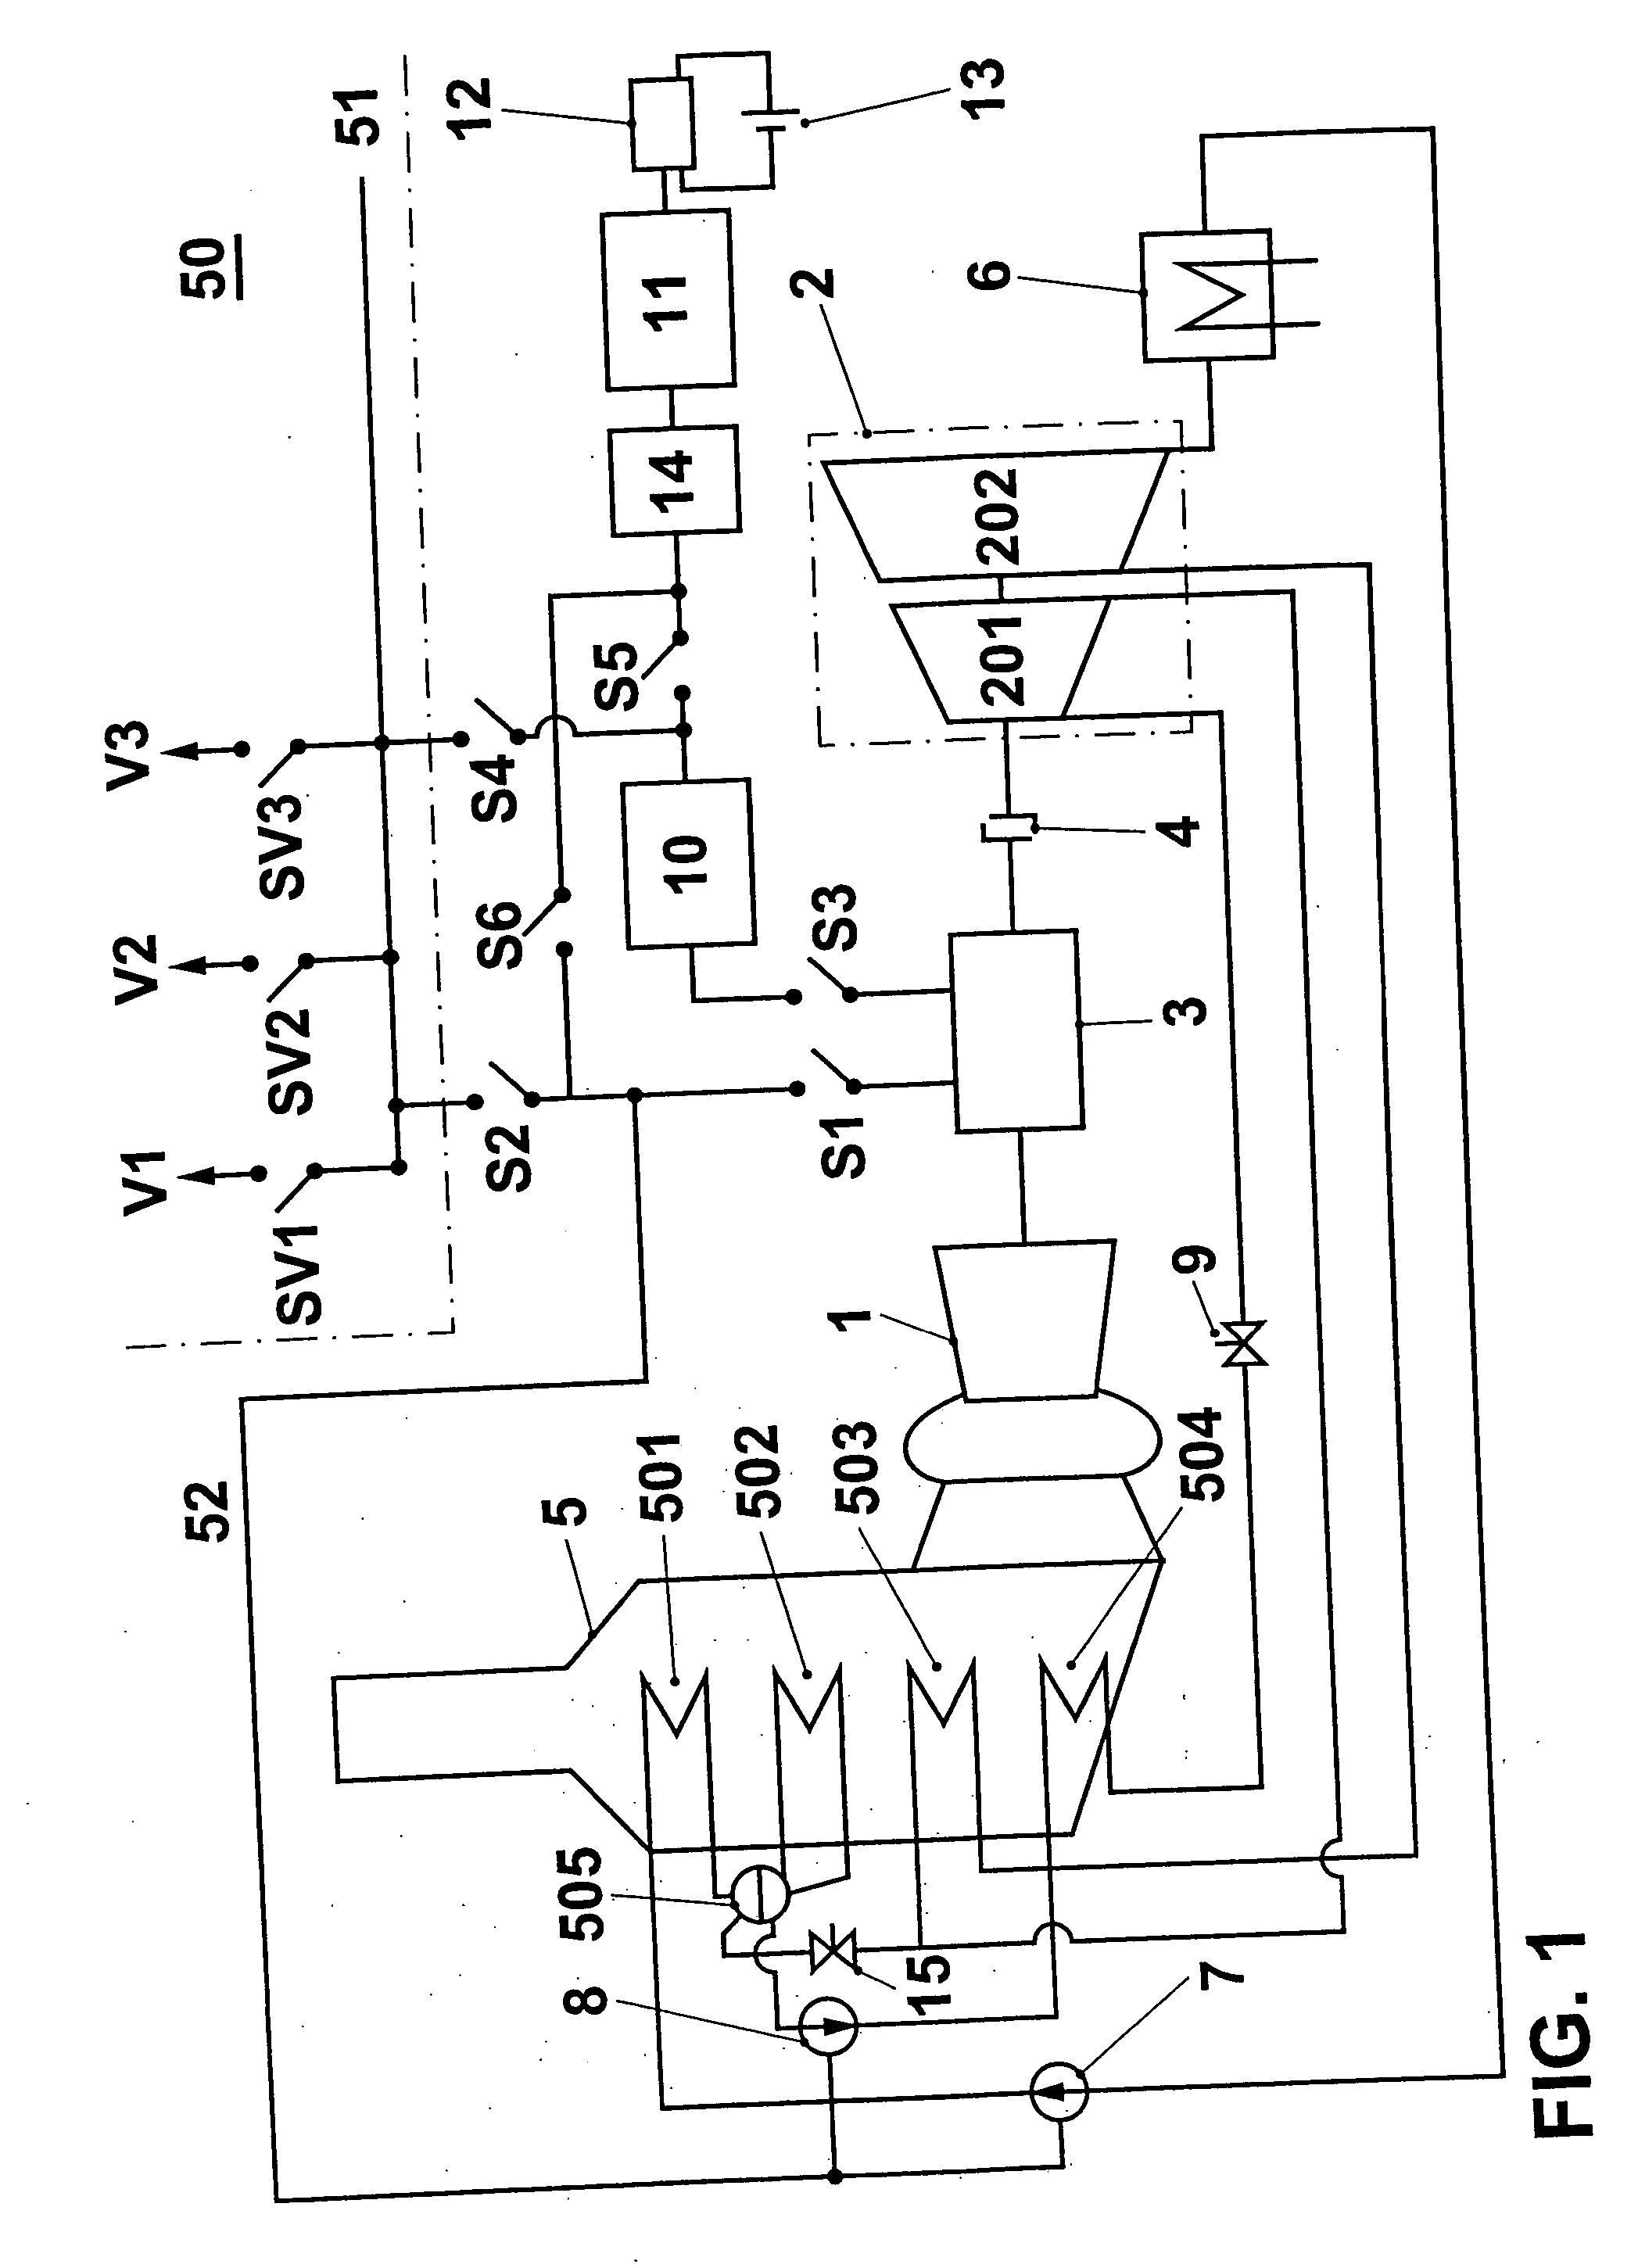 Method for starting up and loading a combined power plant